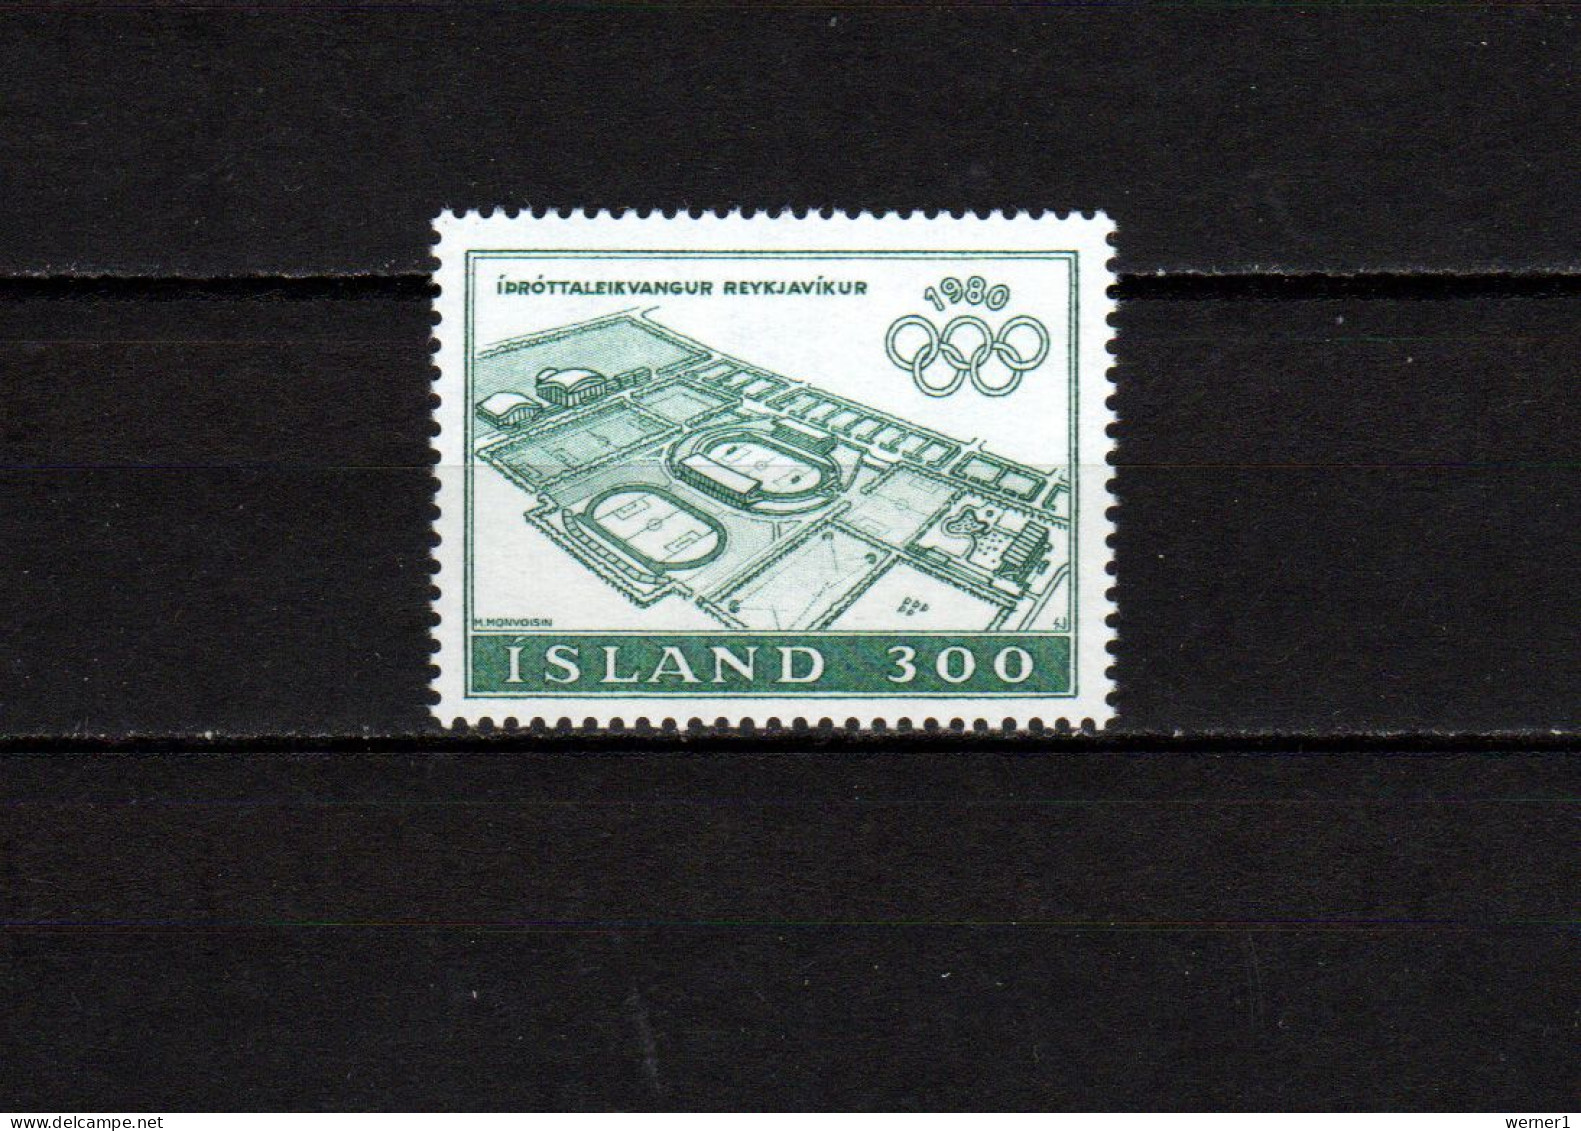 Iceland 1980 Olympic Games Moscow Stamp MNH - Estate 1980: Mosca